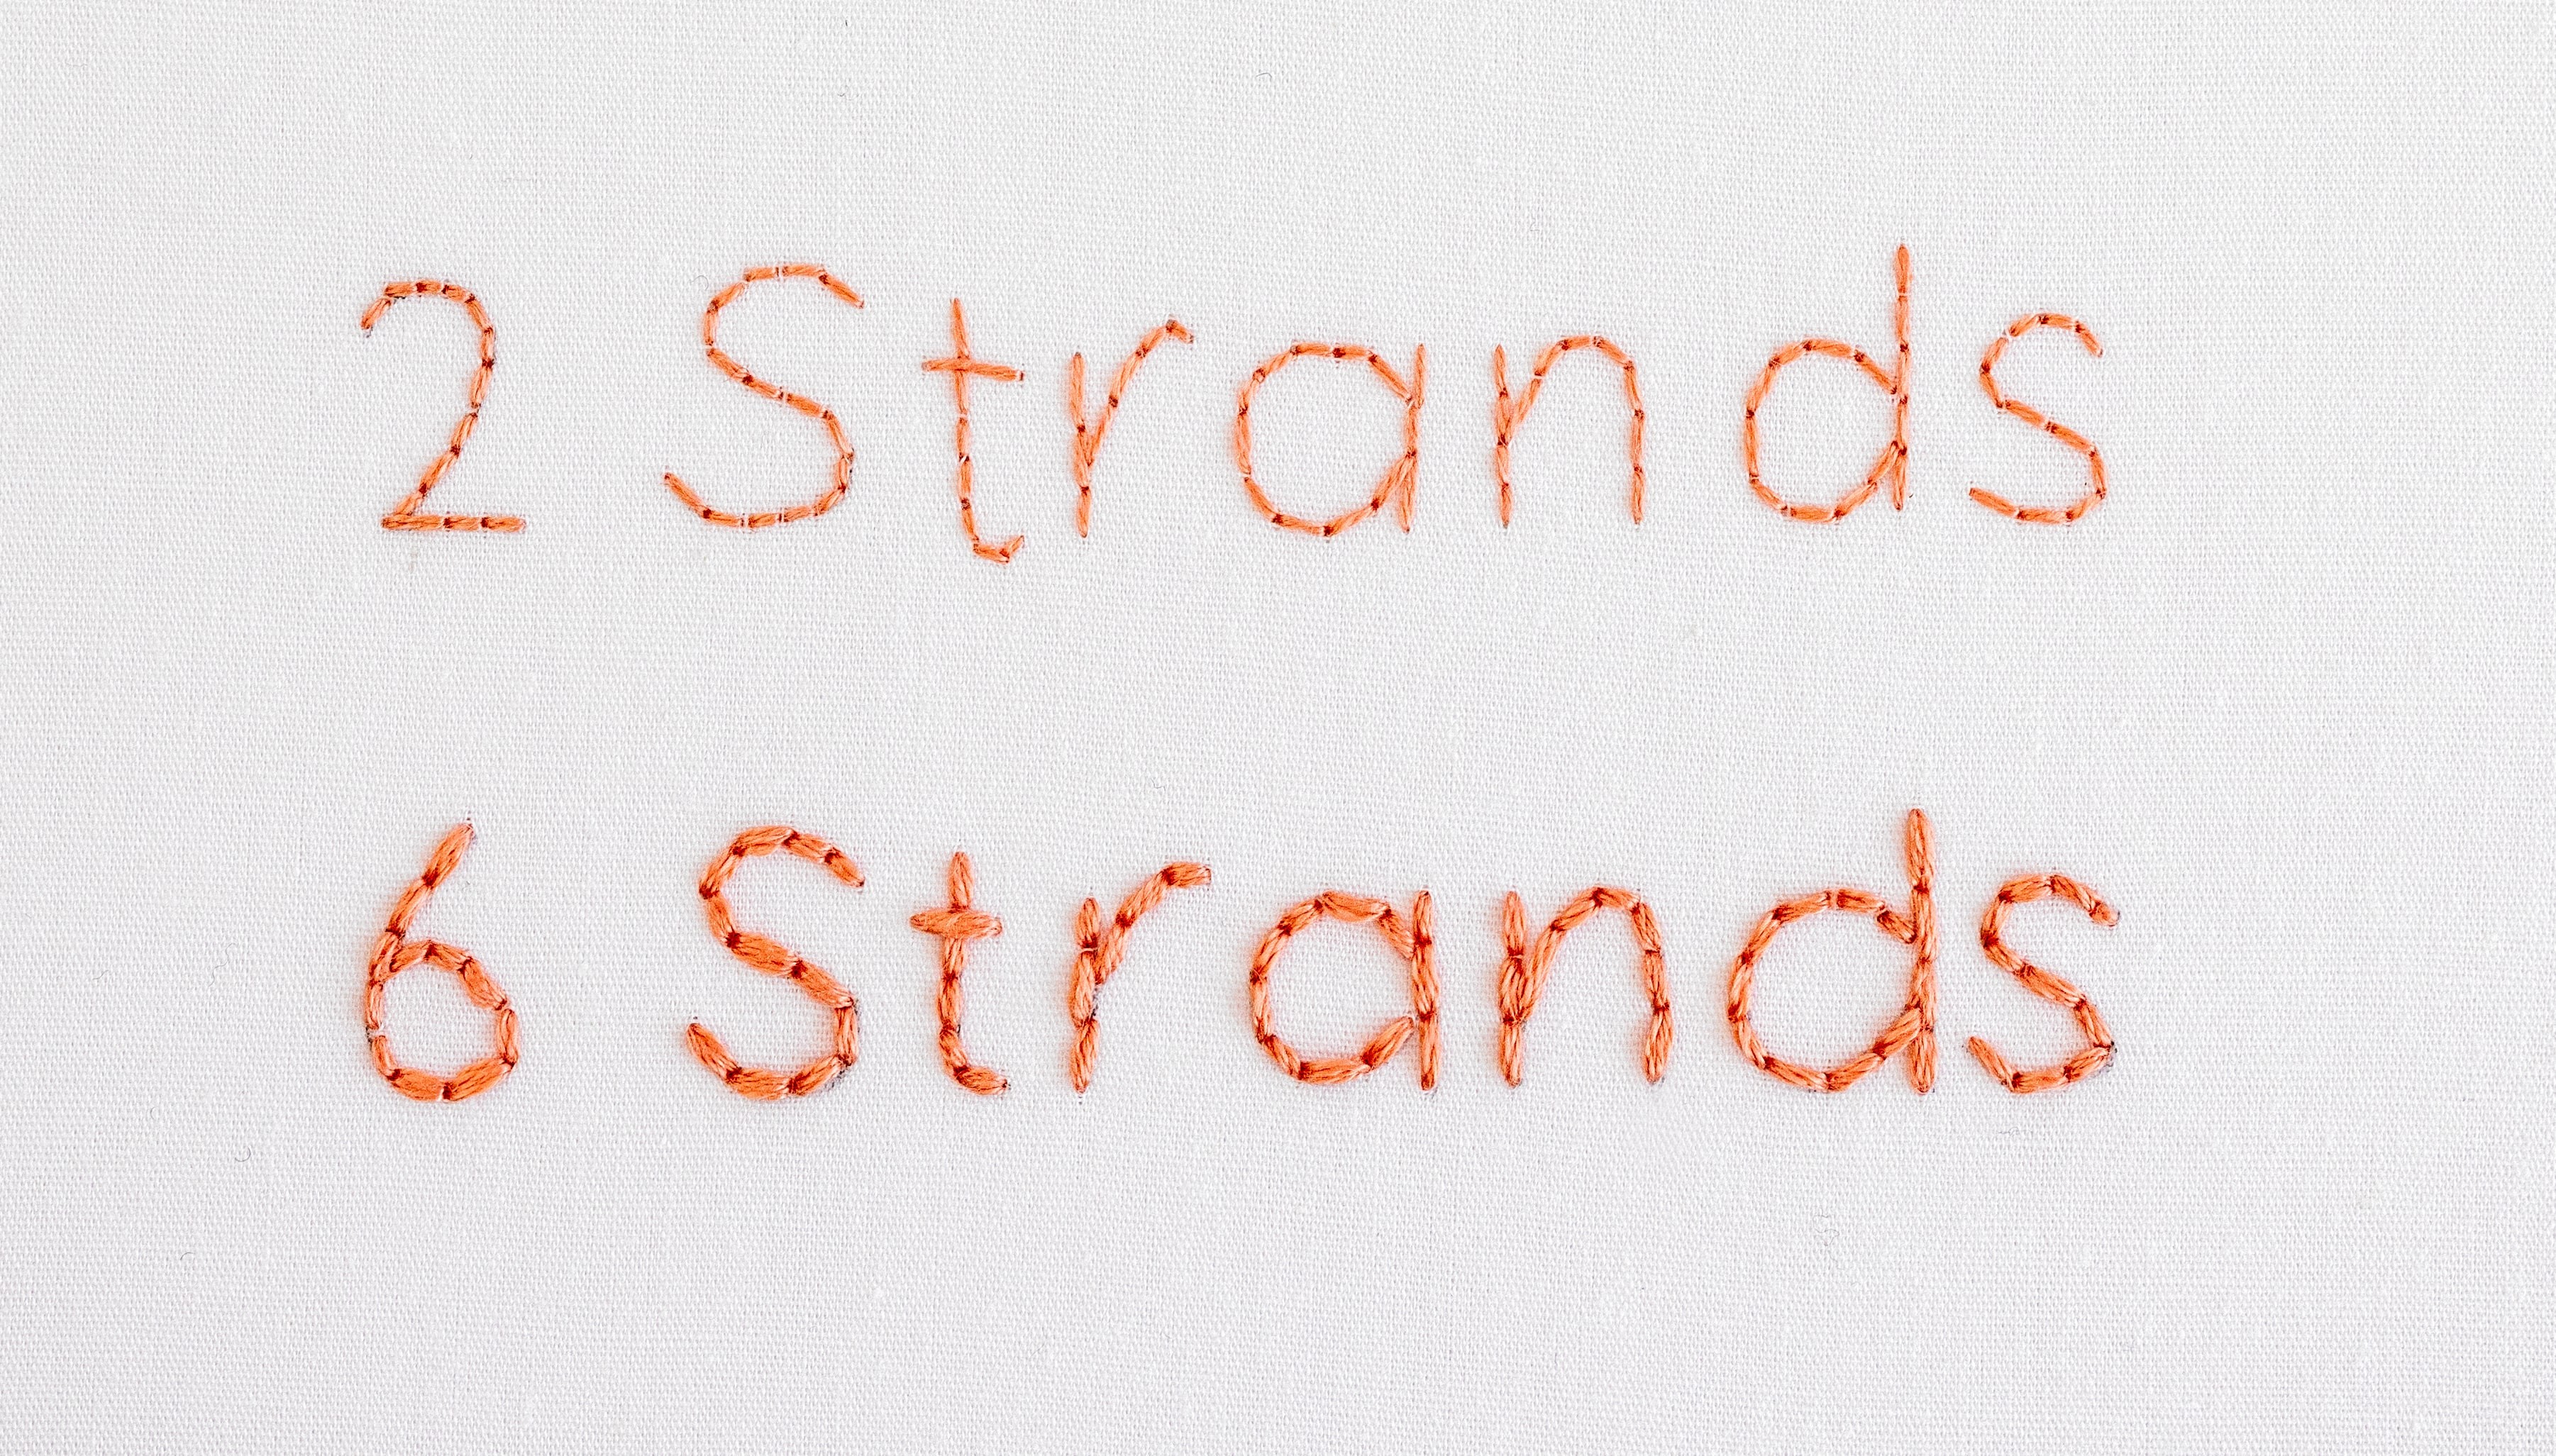 This is an image of the the word '2 strands' using two strands of floss and six strands of floss.